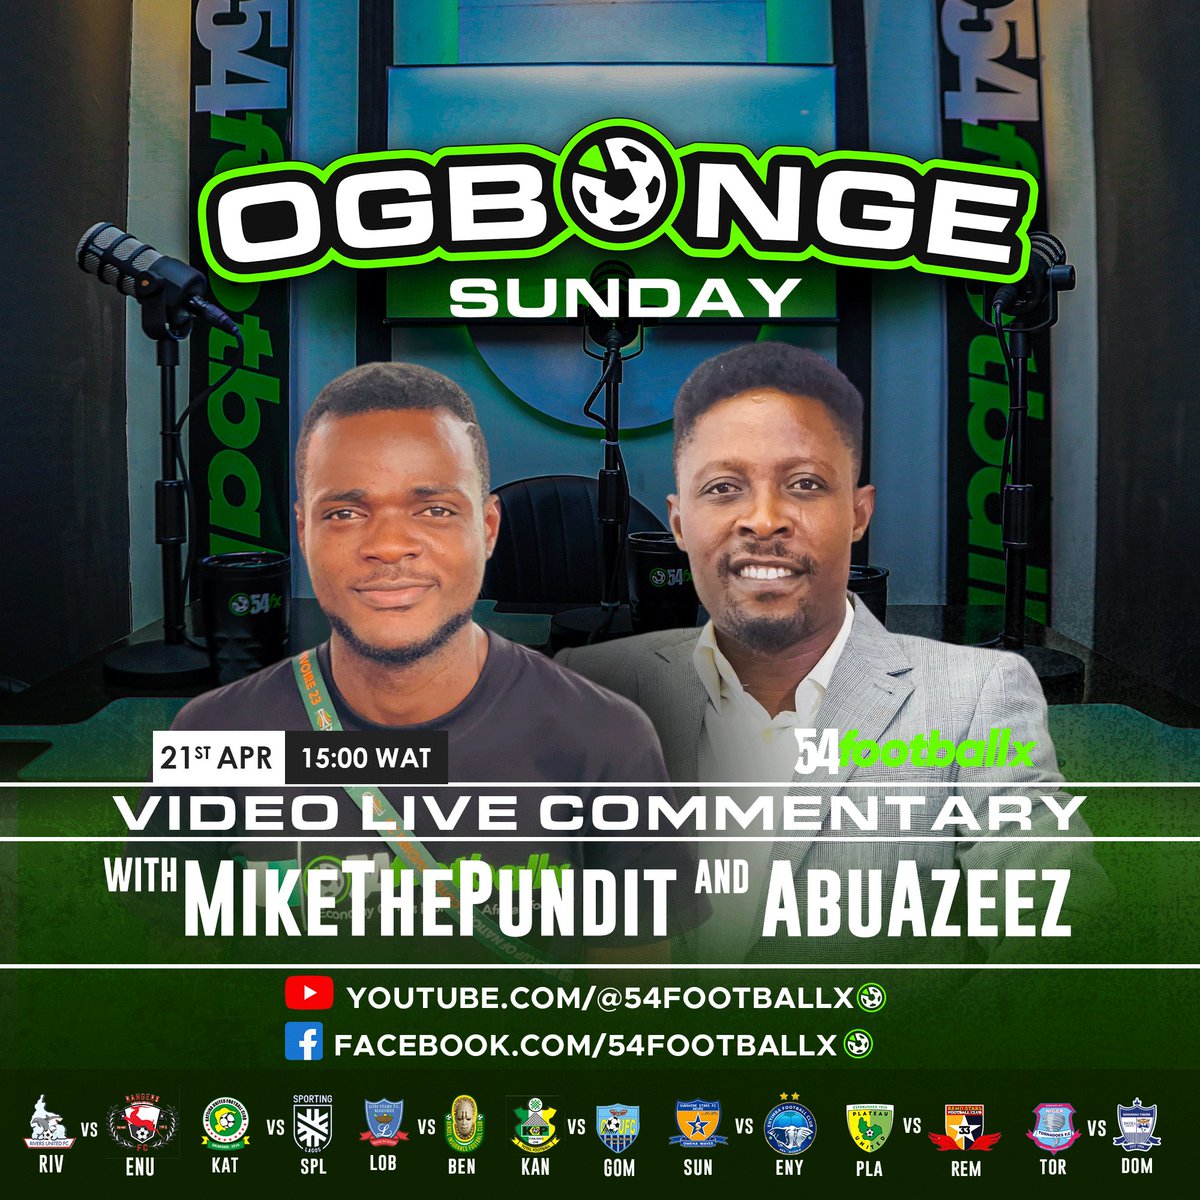 OGBONGE SUNDAY is back this weekend!!!! Eight games in the #NPFL24 MD31 and you have no worries cos we got you covered. Sunday is about to become FUN-DAY with Ogbonge Sunday live broadcast, bringing you closer to the matchday action and drama across all centres. Join